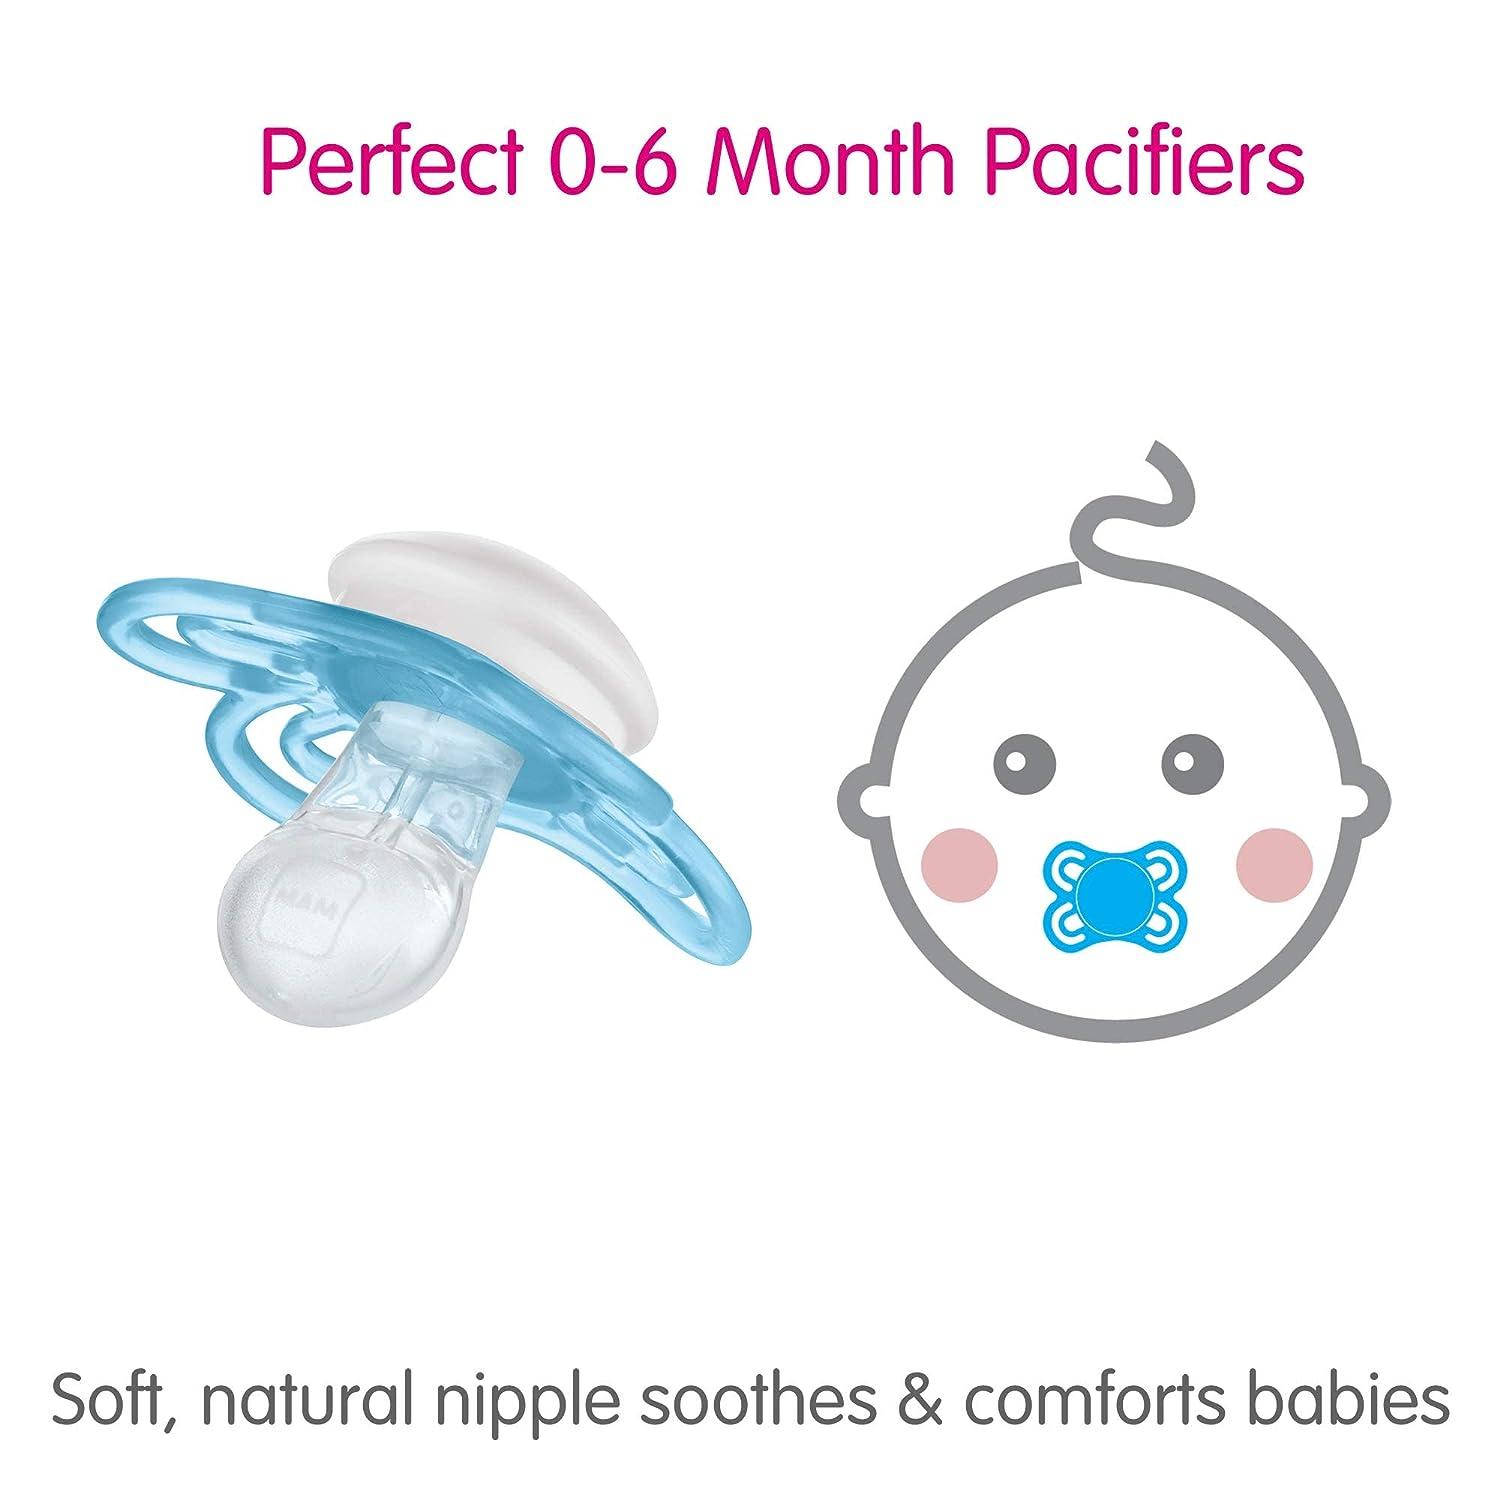 MAM Perfect Night Baby Pacifier Patented Nipple Glows in the Dark 2 Pack 0-6  Months Unisex Unisex 2 Count (Pack of 1)